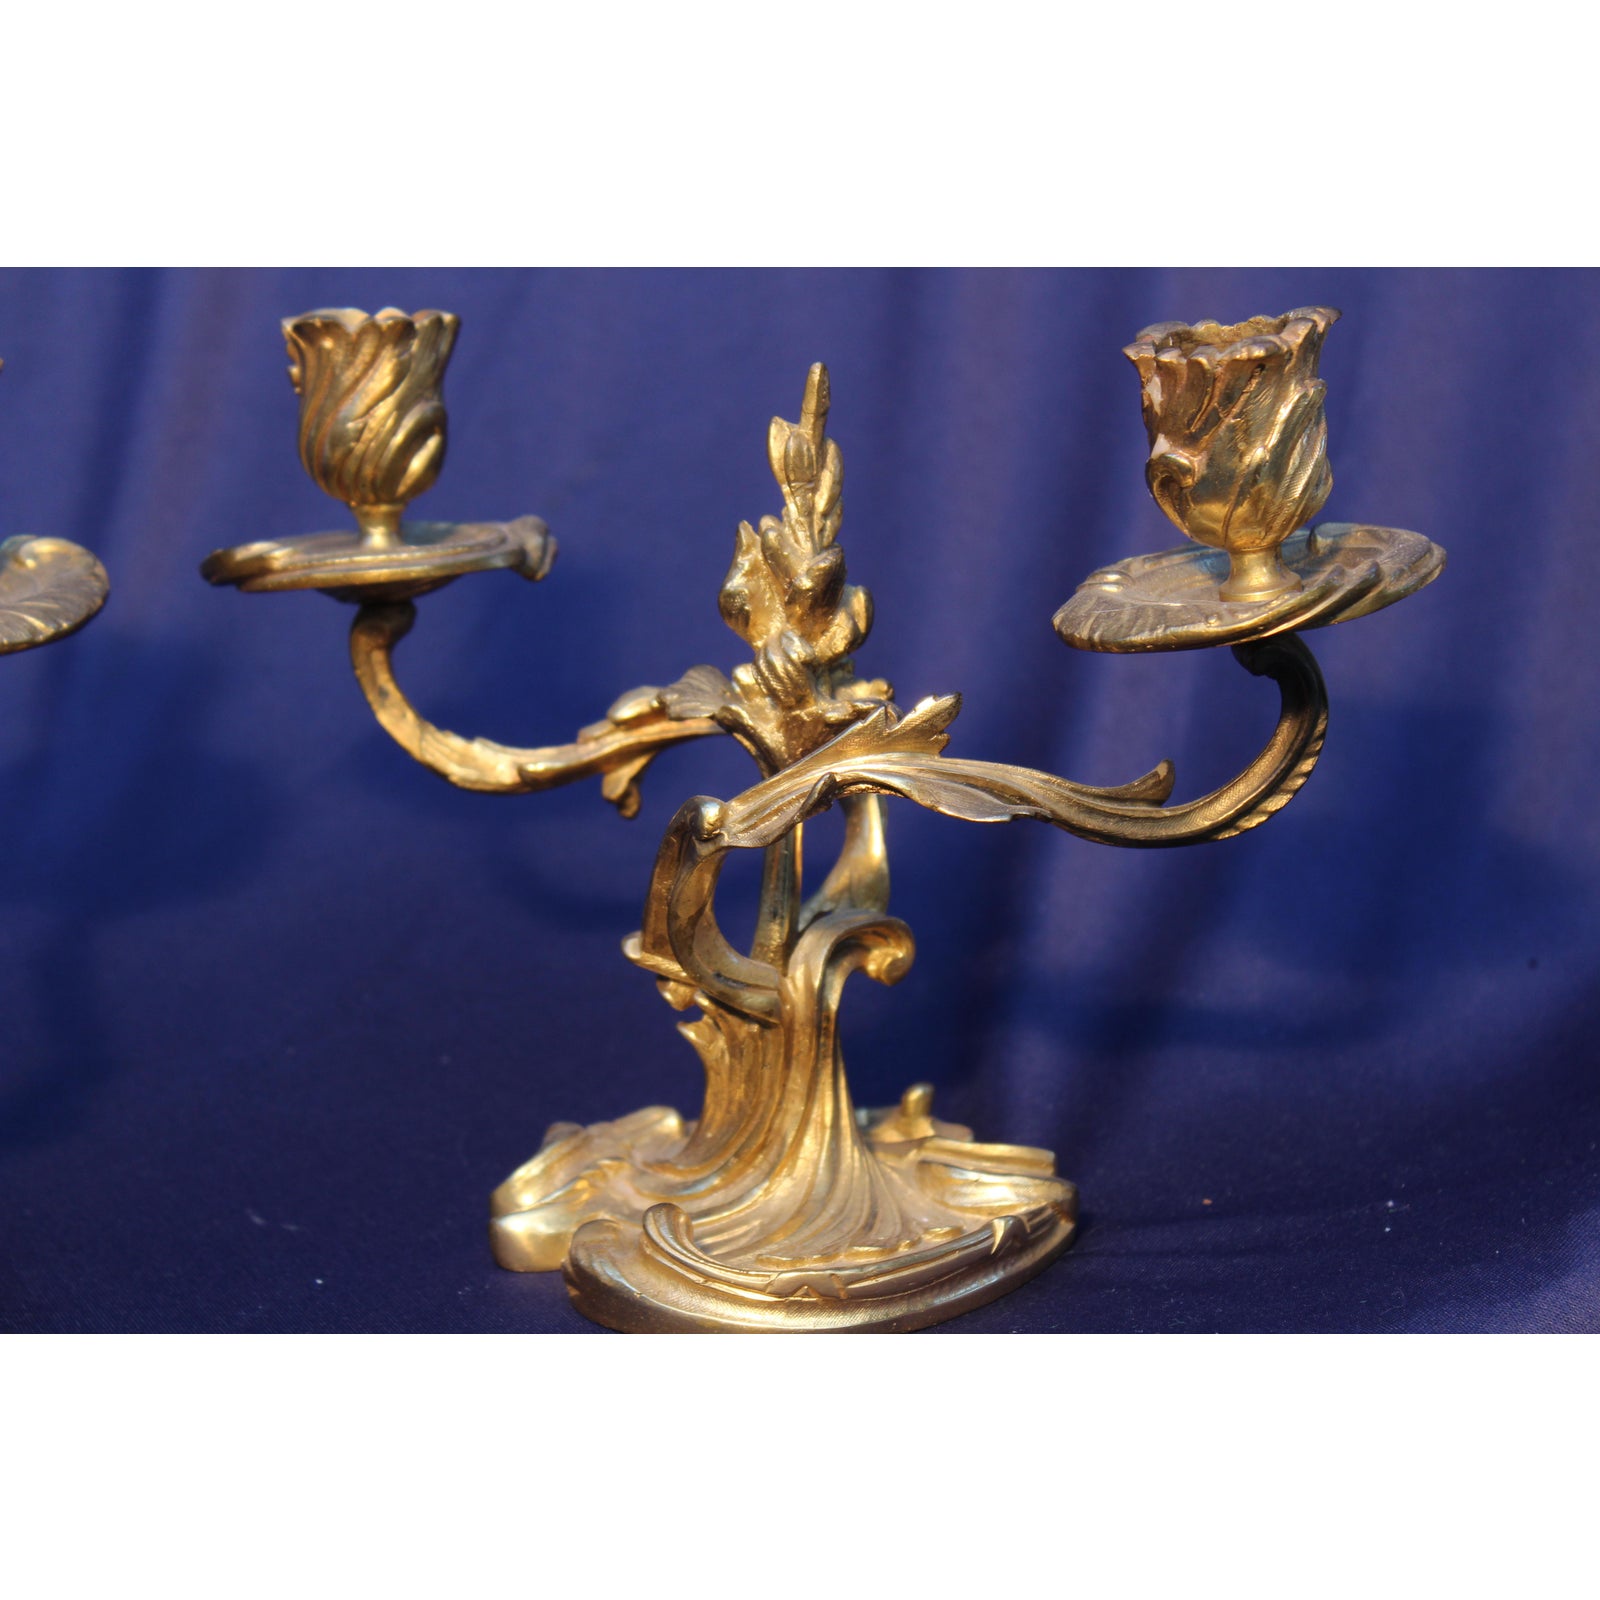 late-19th-c-louis-xv-style-candelabras-a-pair-7932